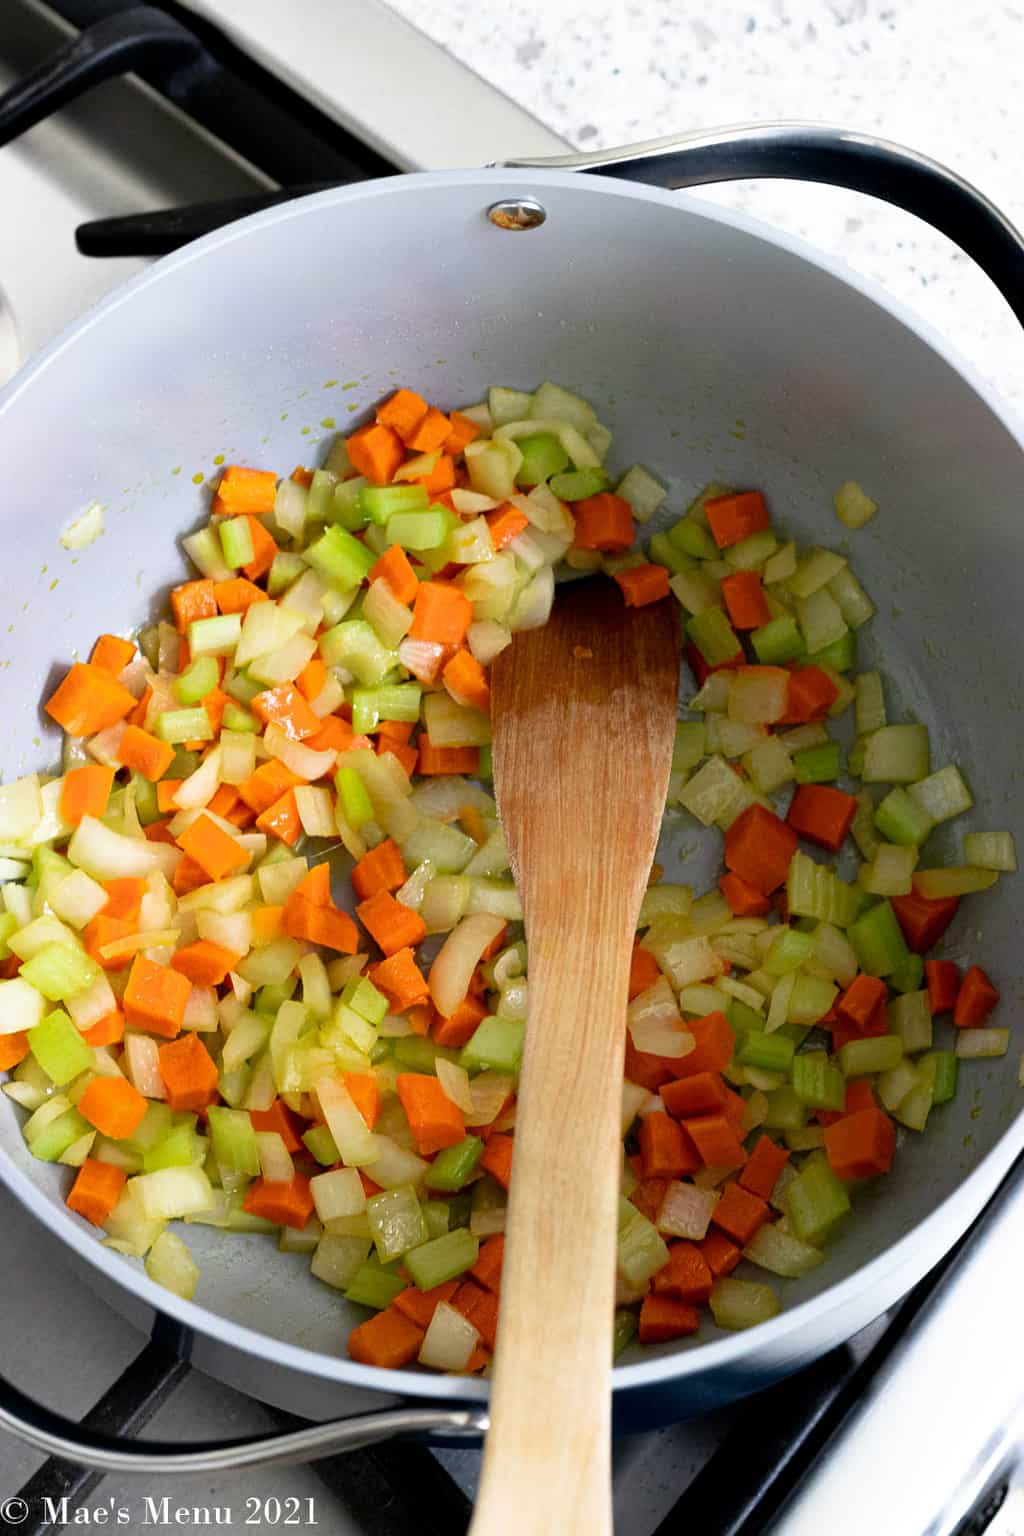 An overhead shot of a pan of onions, carrots, and celery